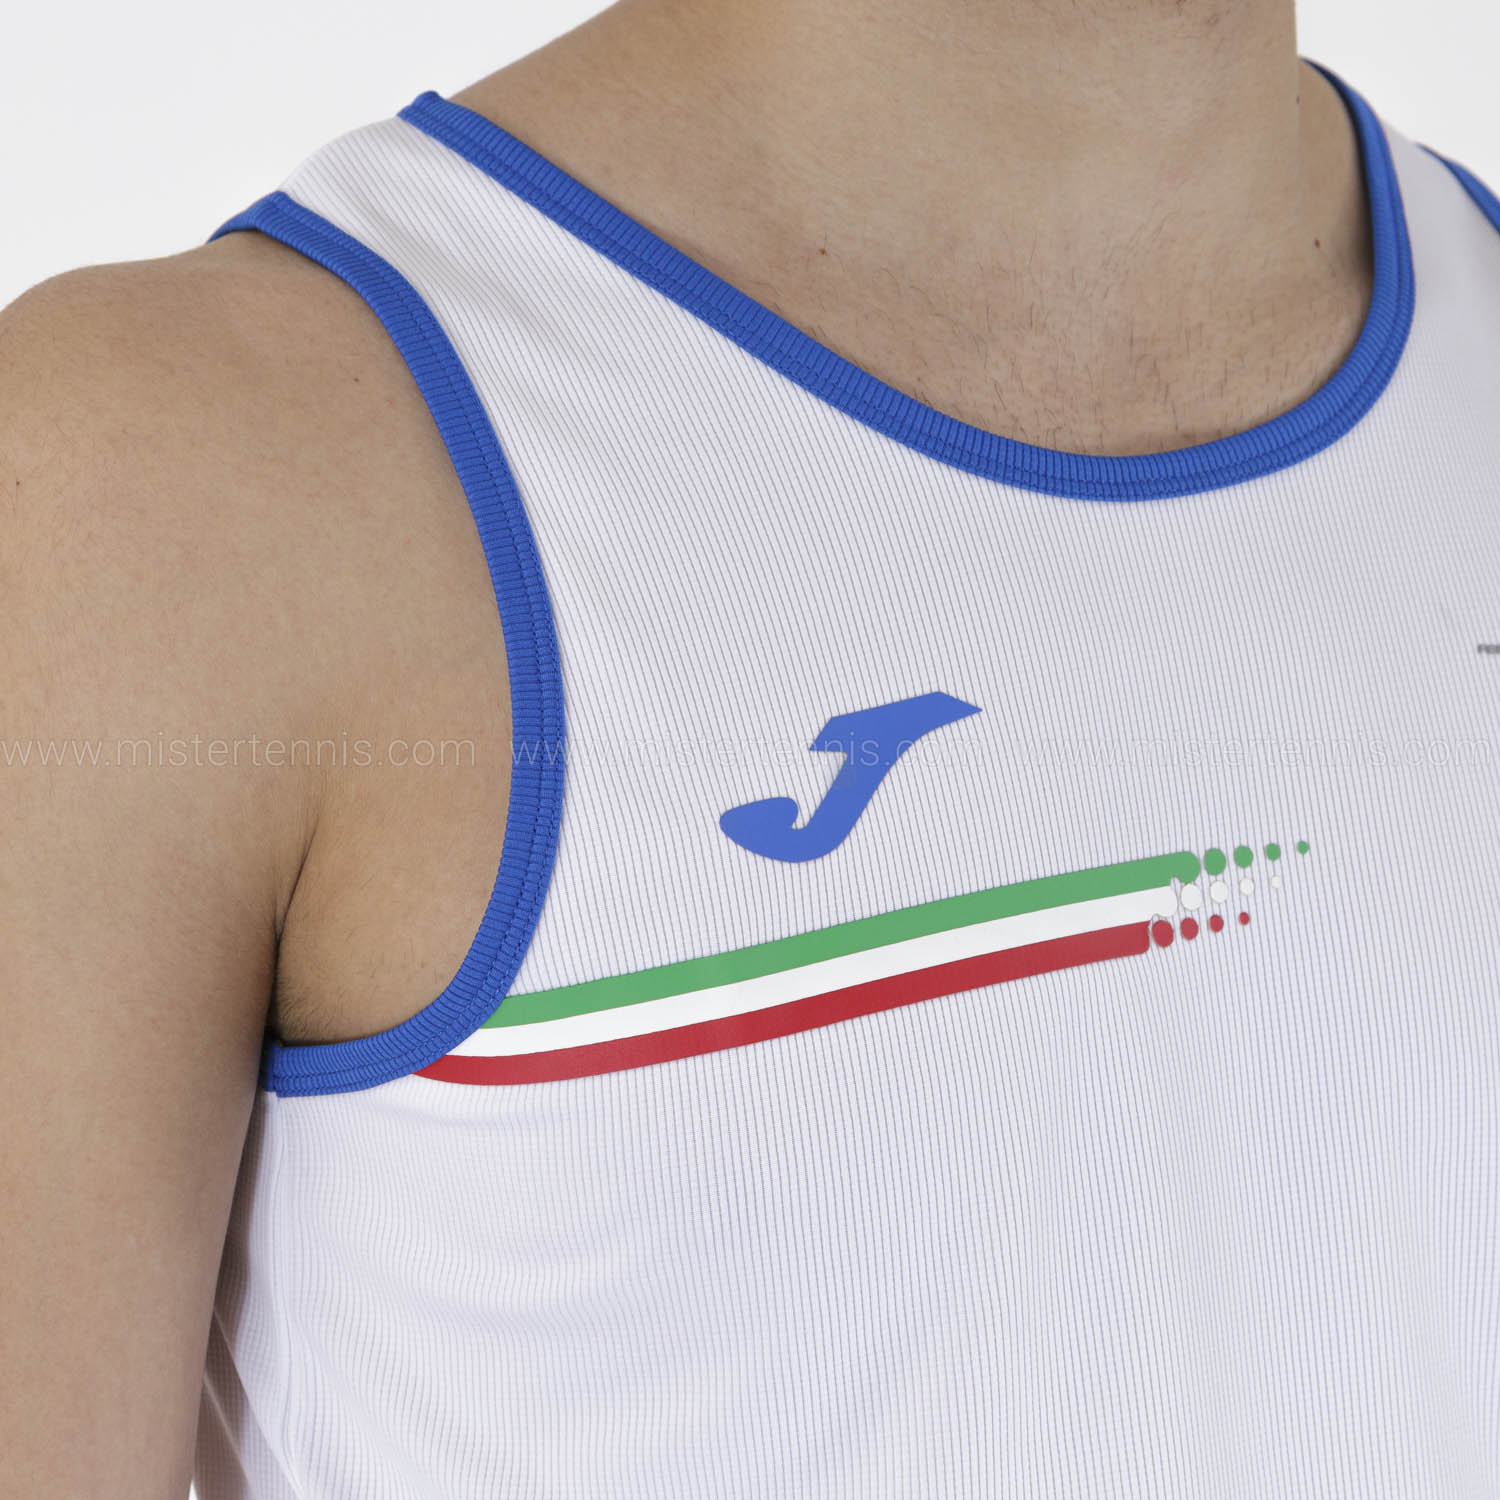 Joma FIT Tank - White